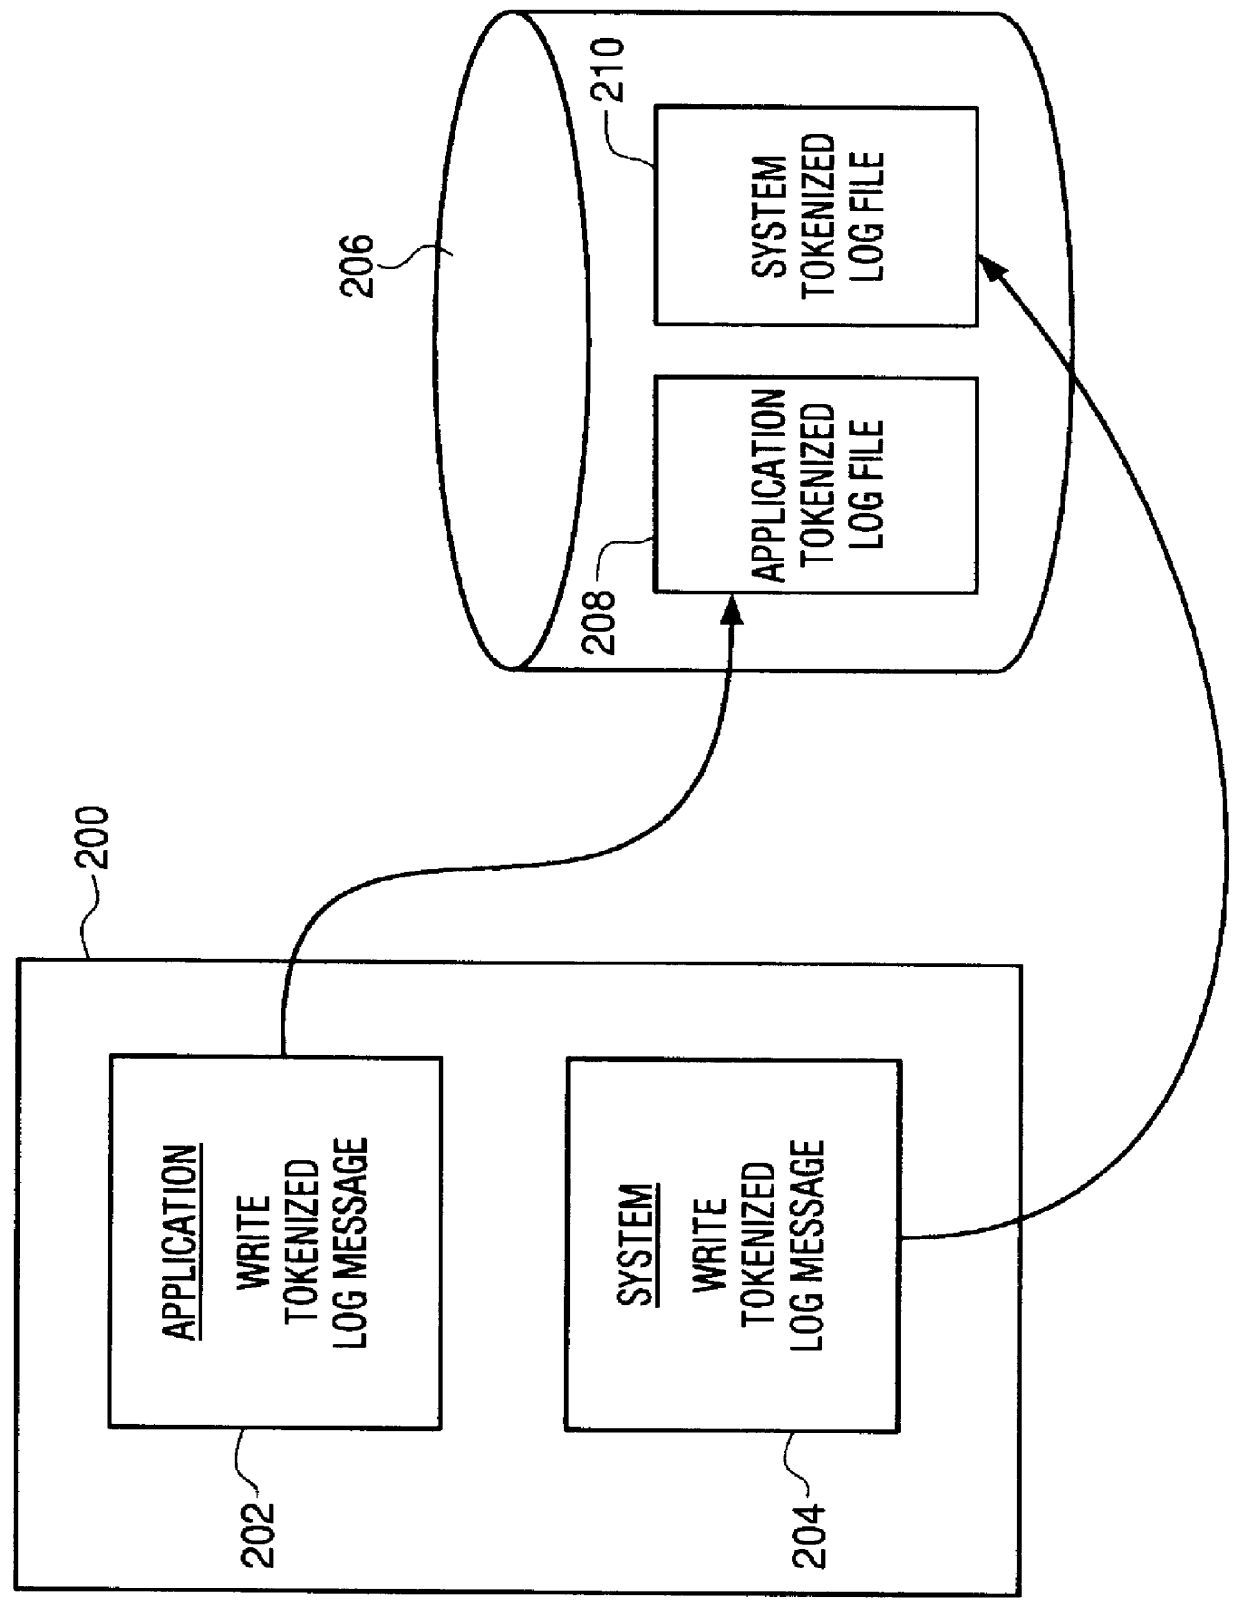 Method and structure for tokenized message logging system